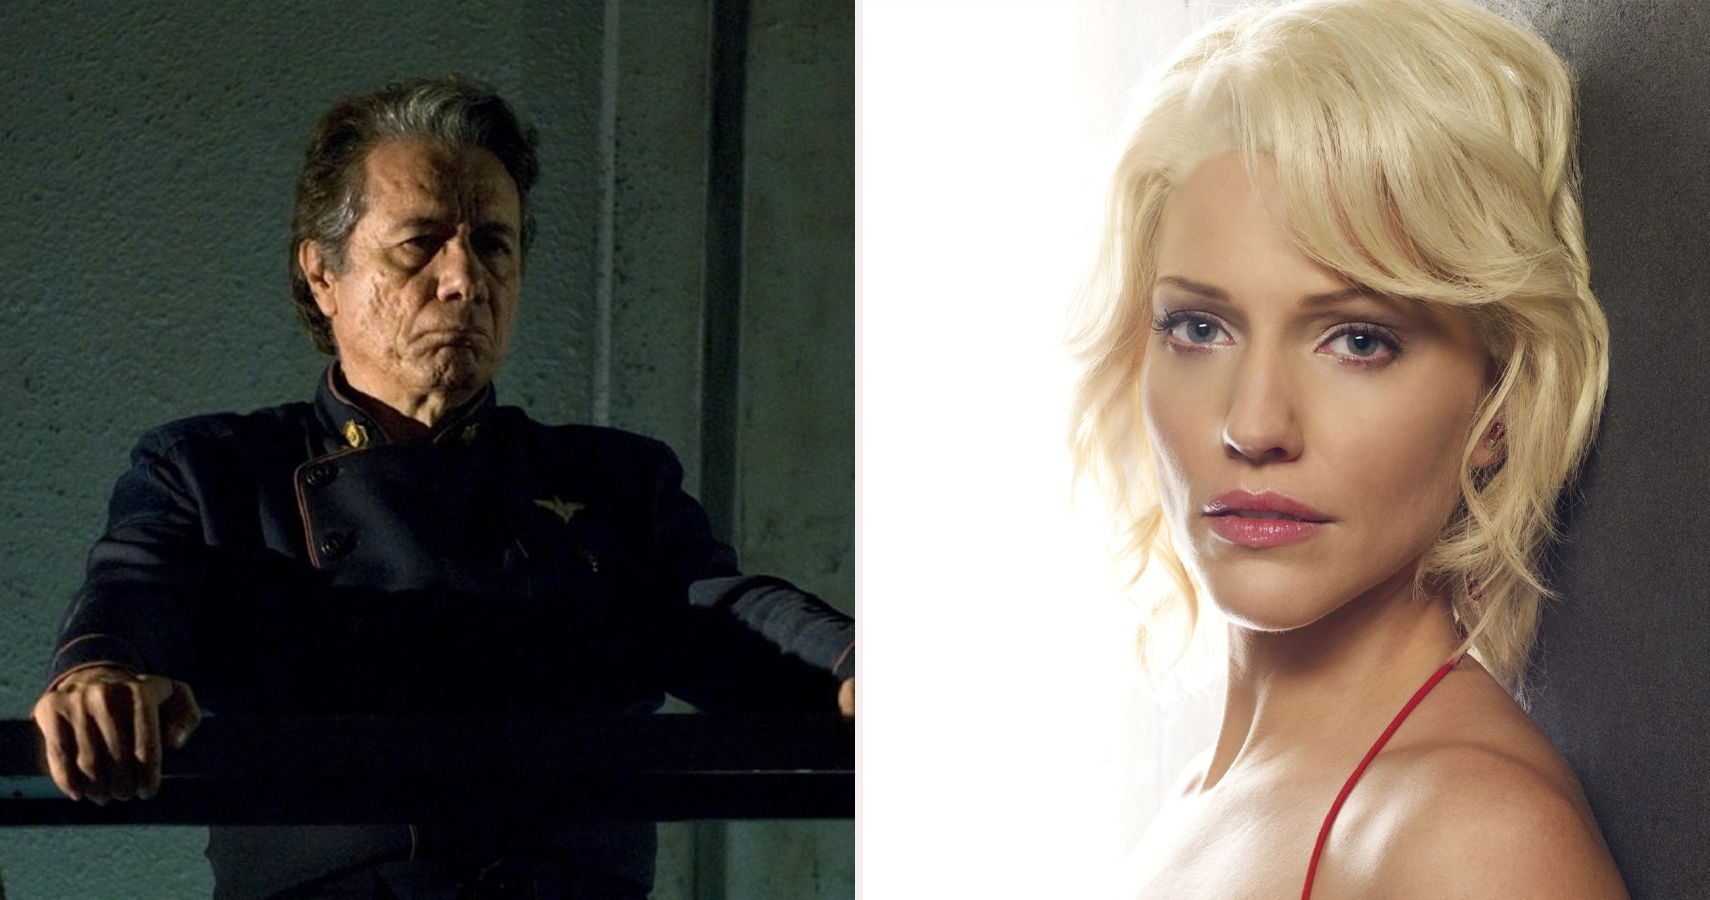 Battlestar Galactica Characters Sorted Into Their Hogwarts Houses